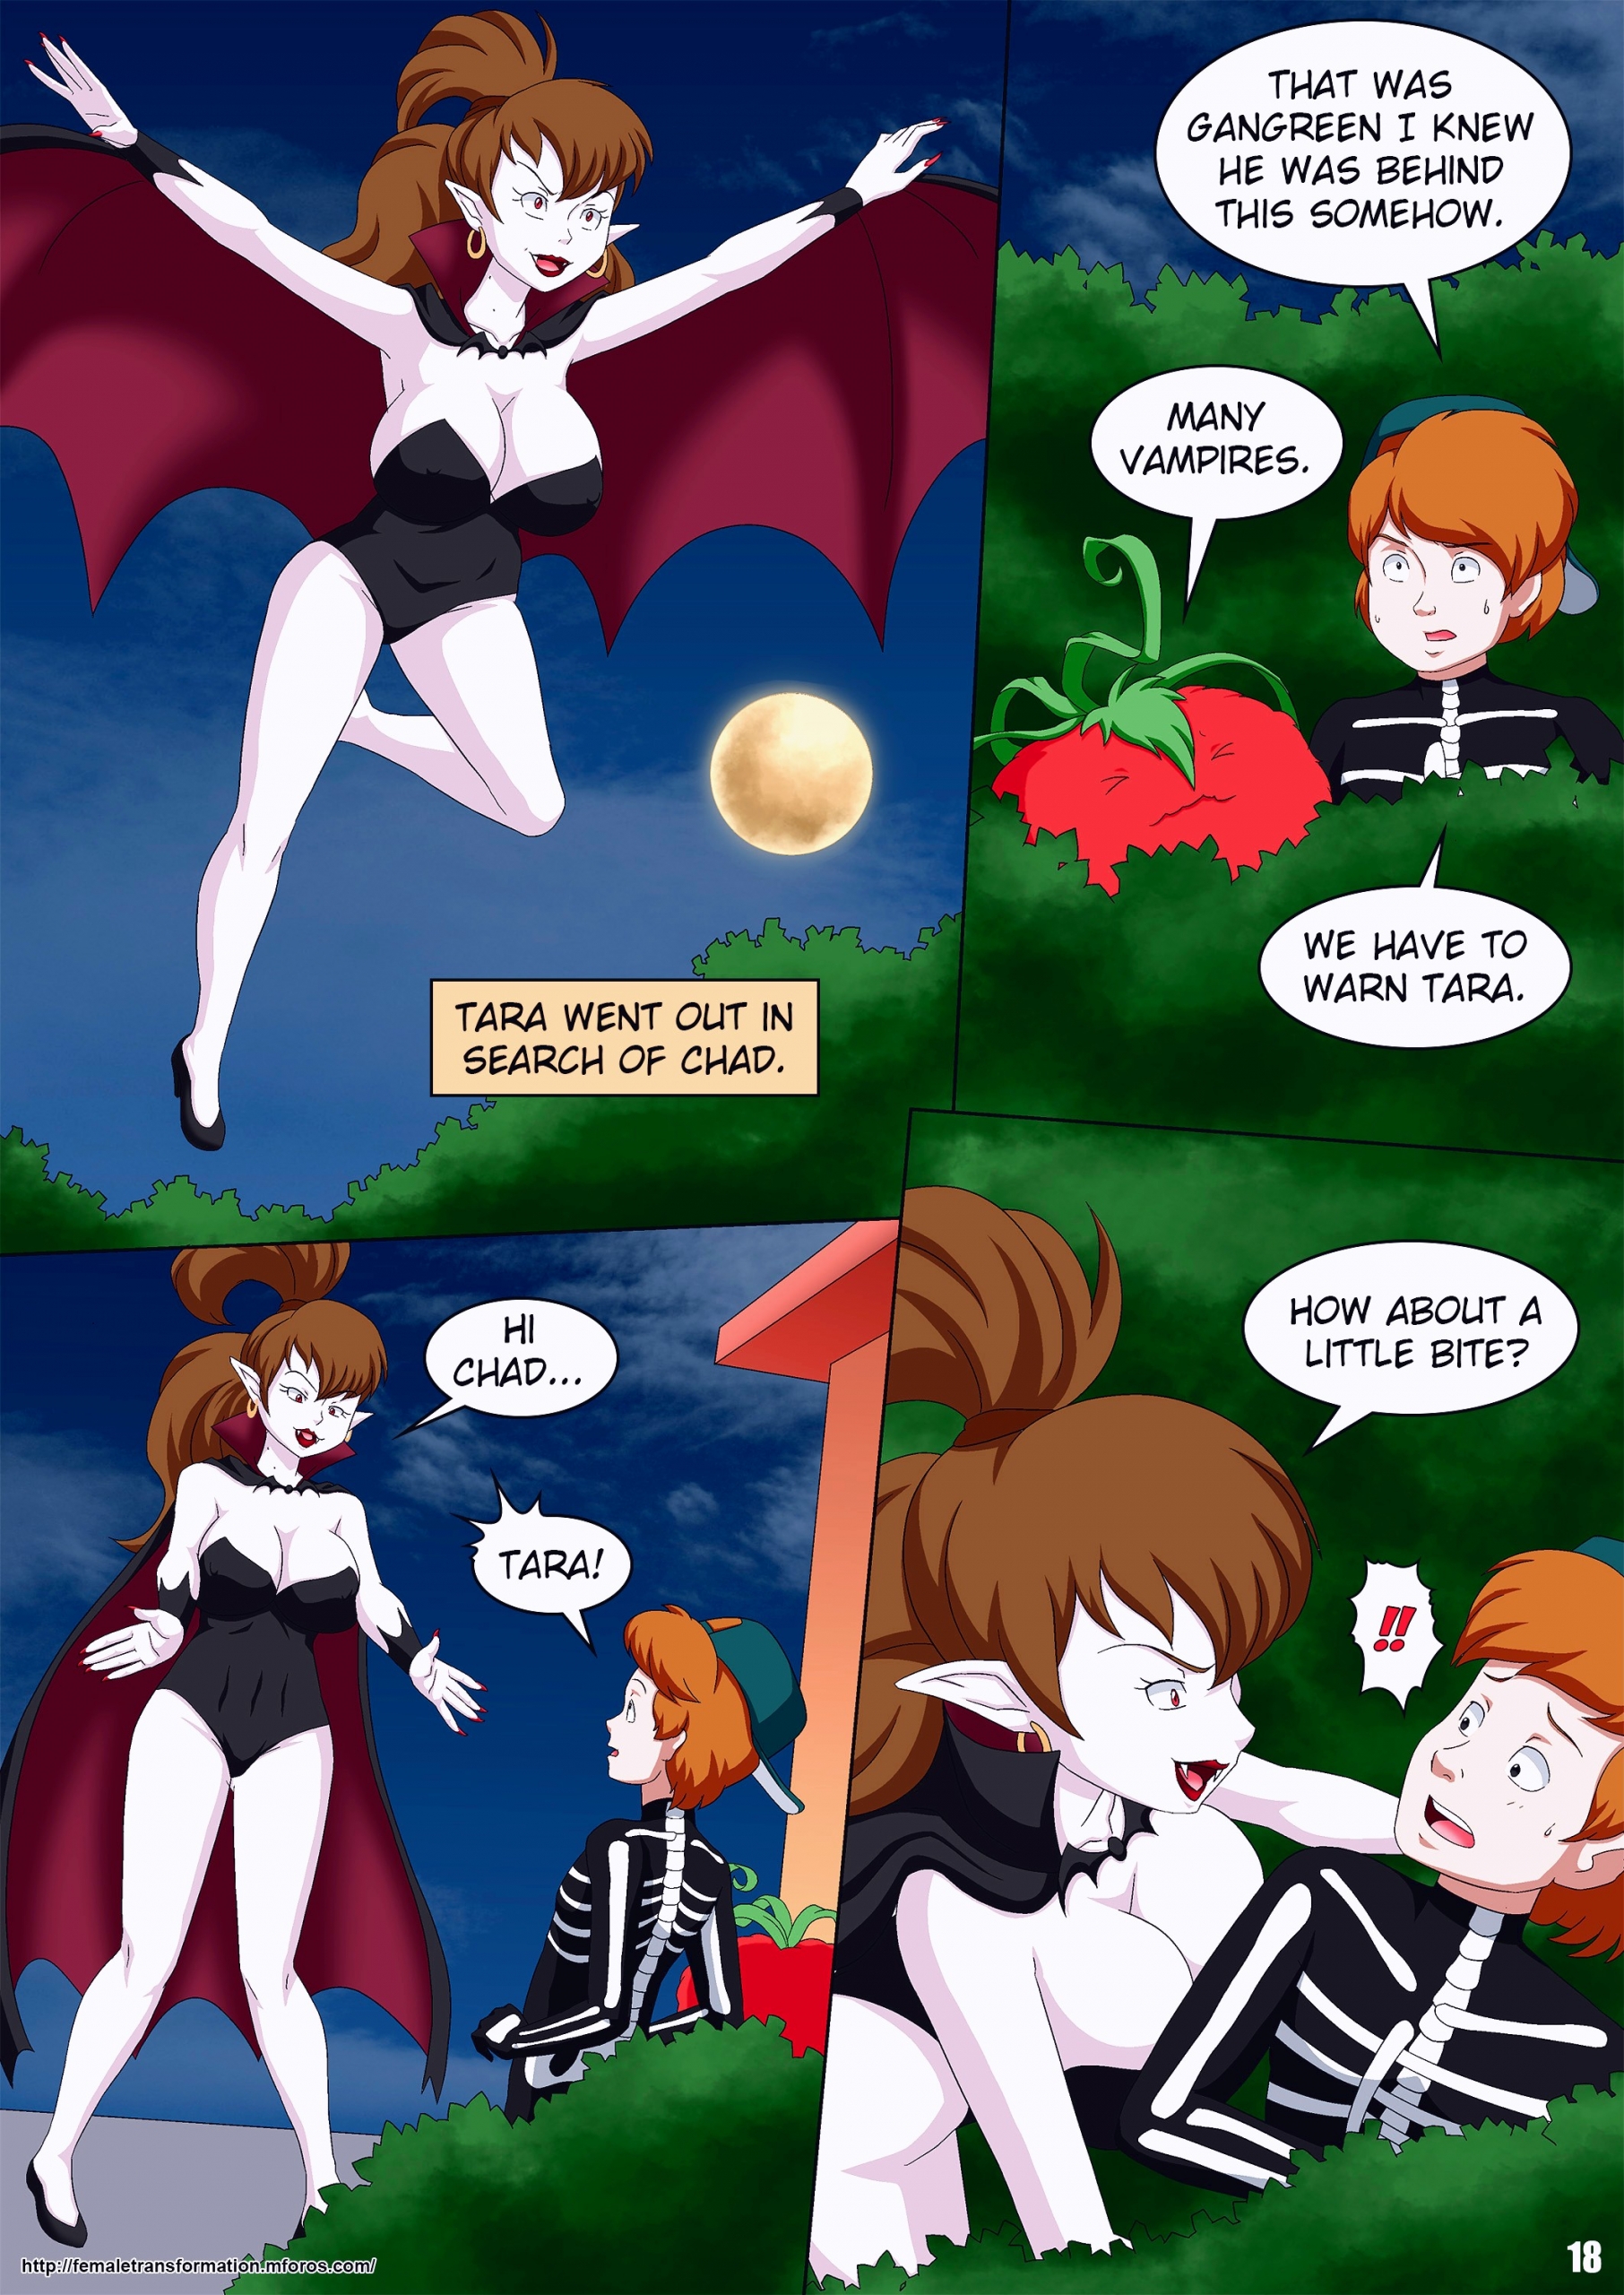 Vamp or Treat porn comic page 007